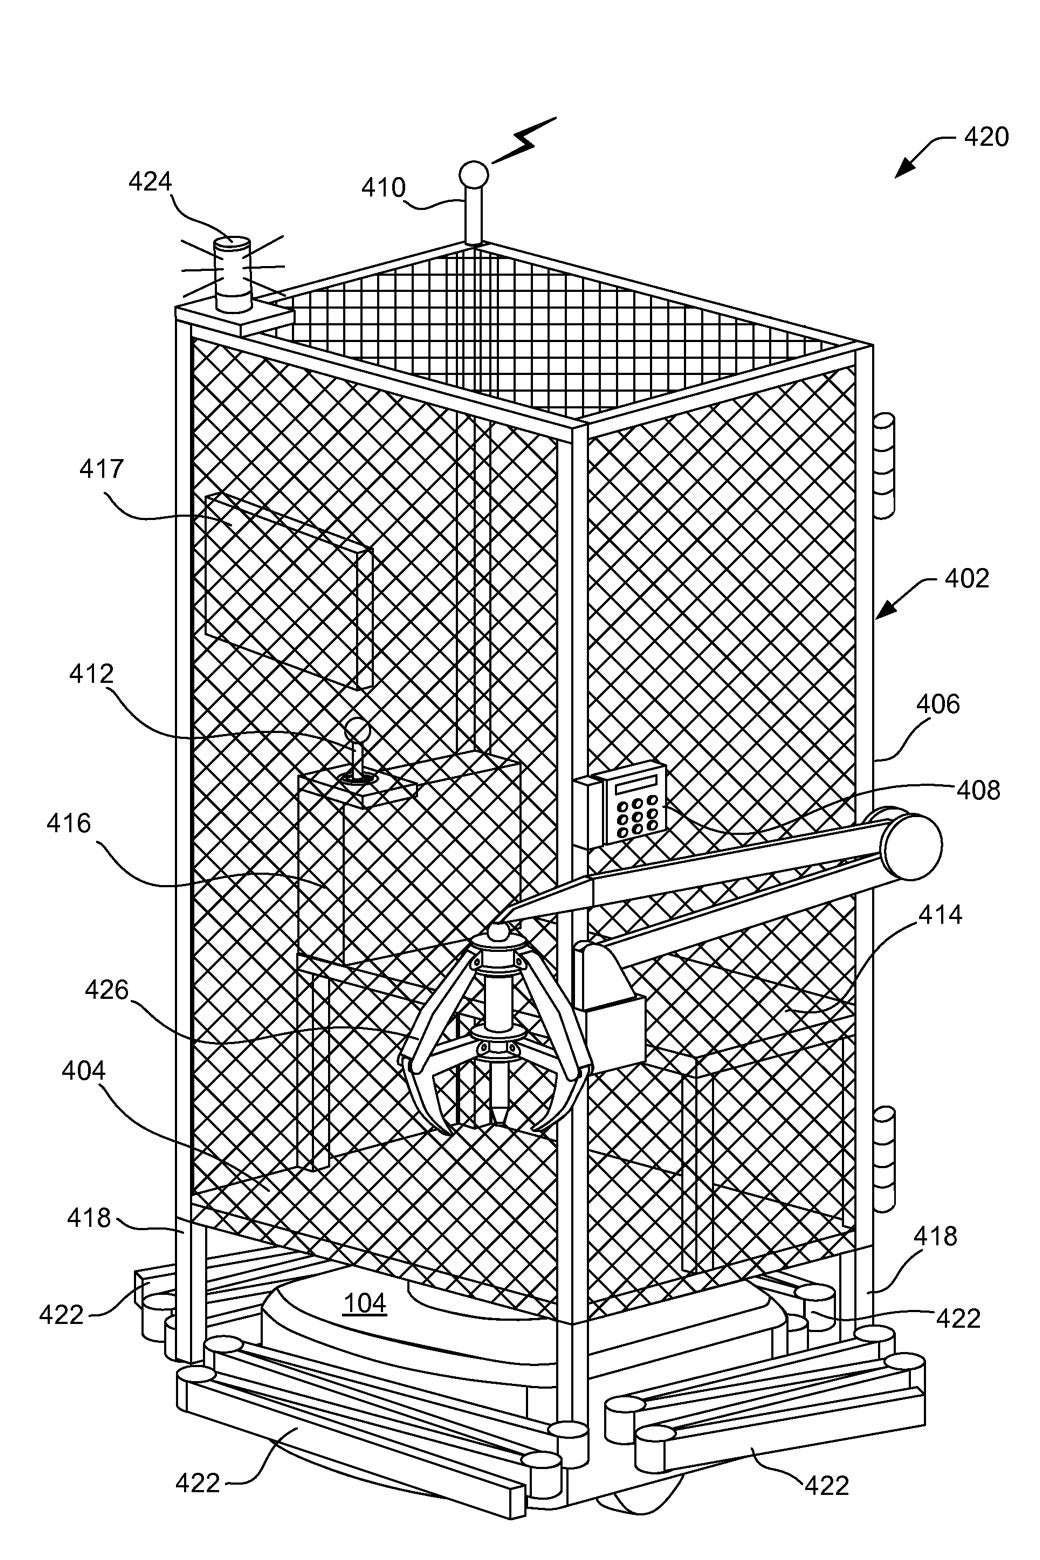 An image of a cage from the Amazon patent.